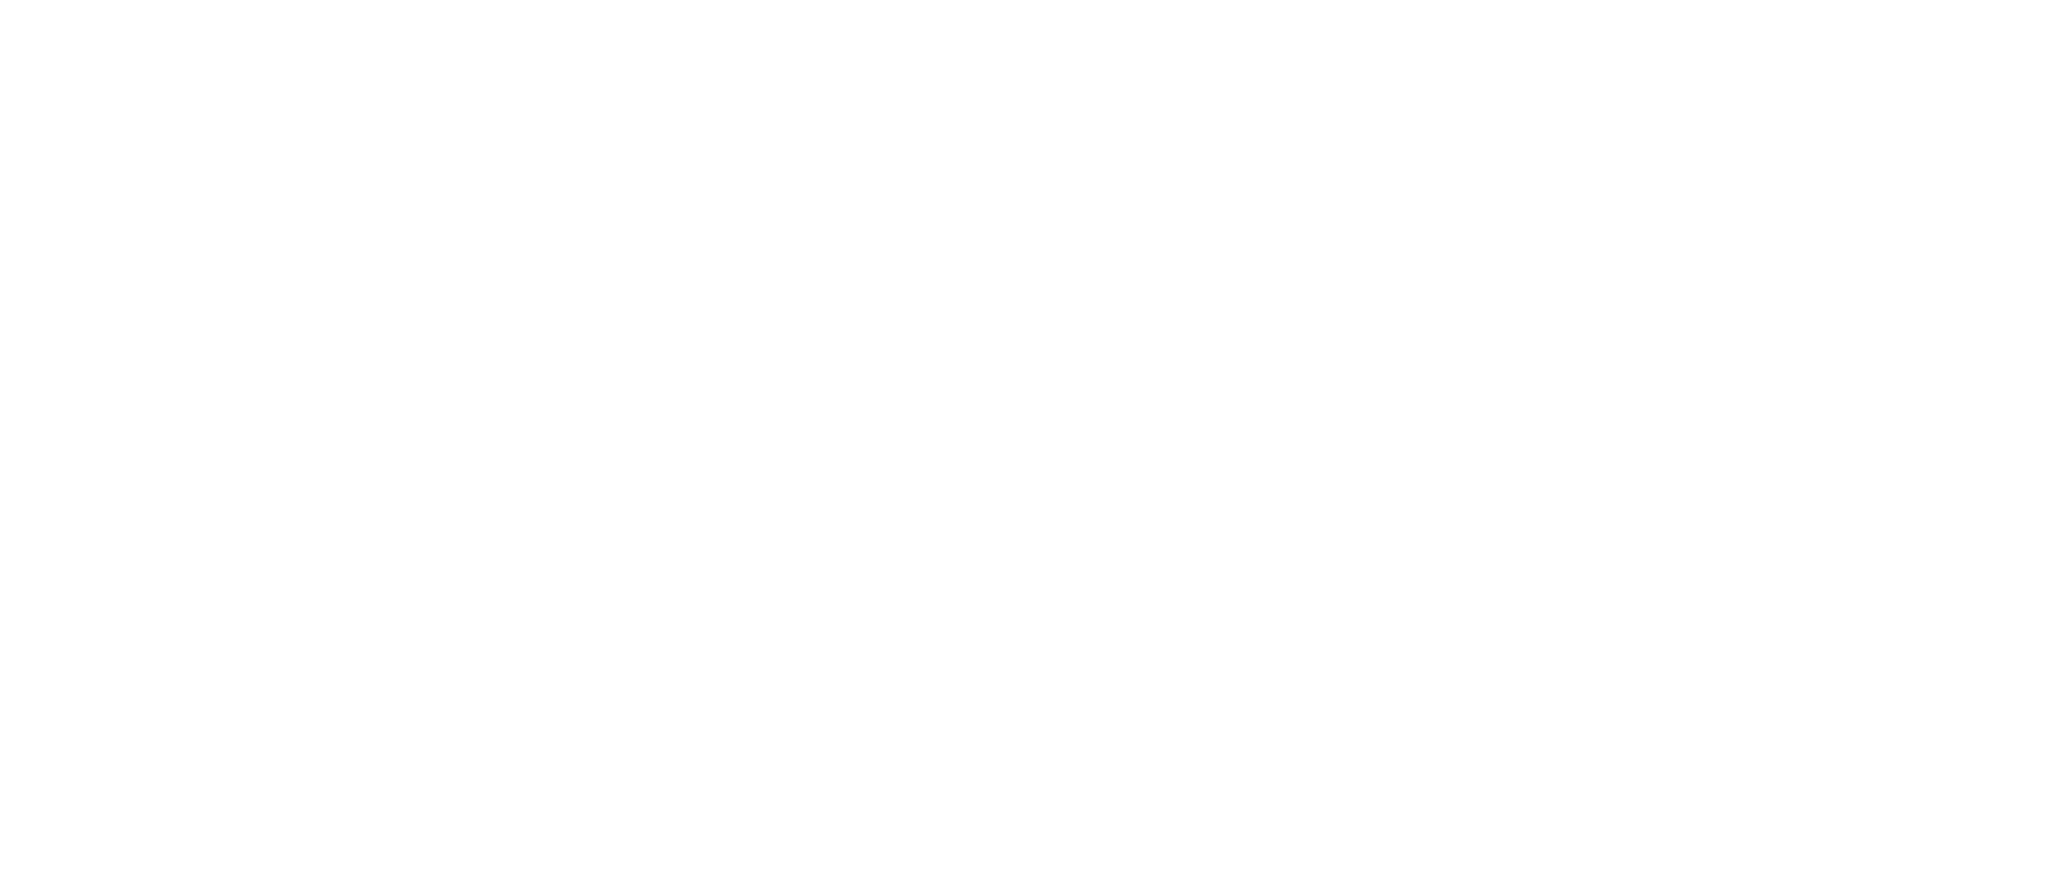 The michael freas logo on a green background.